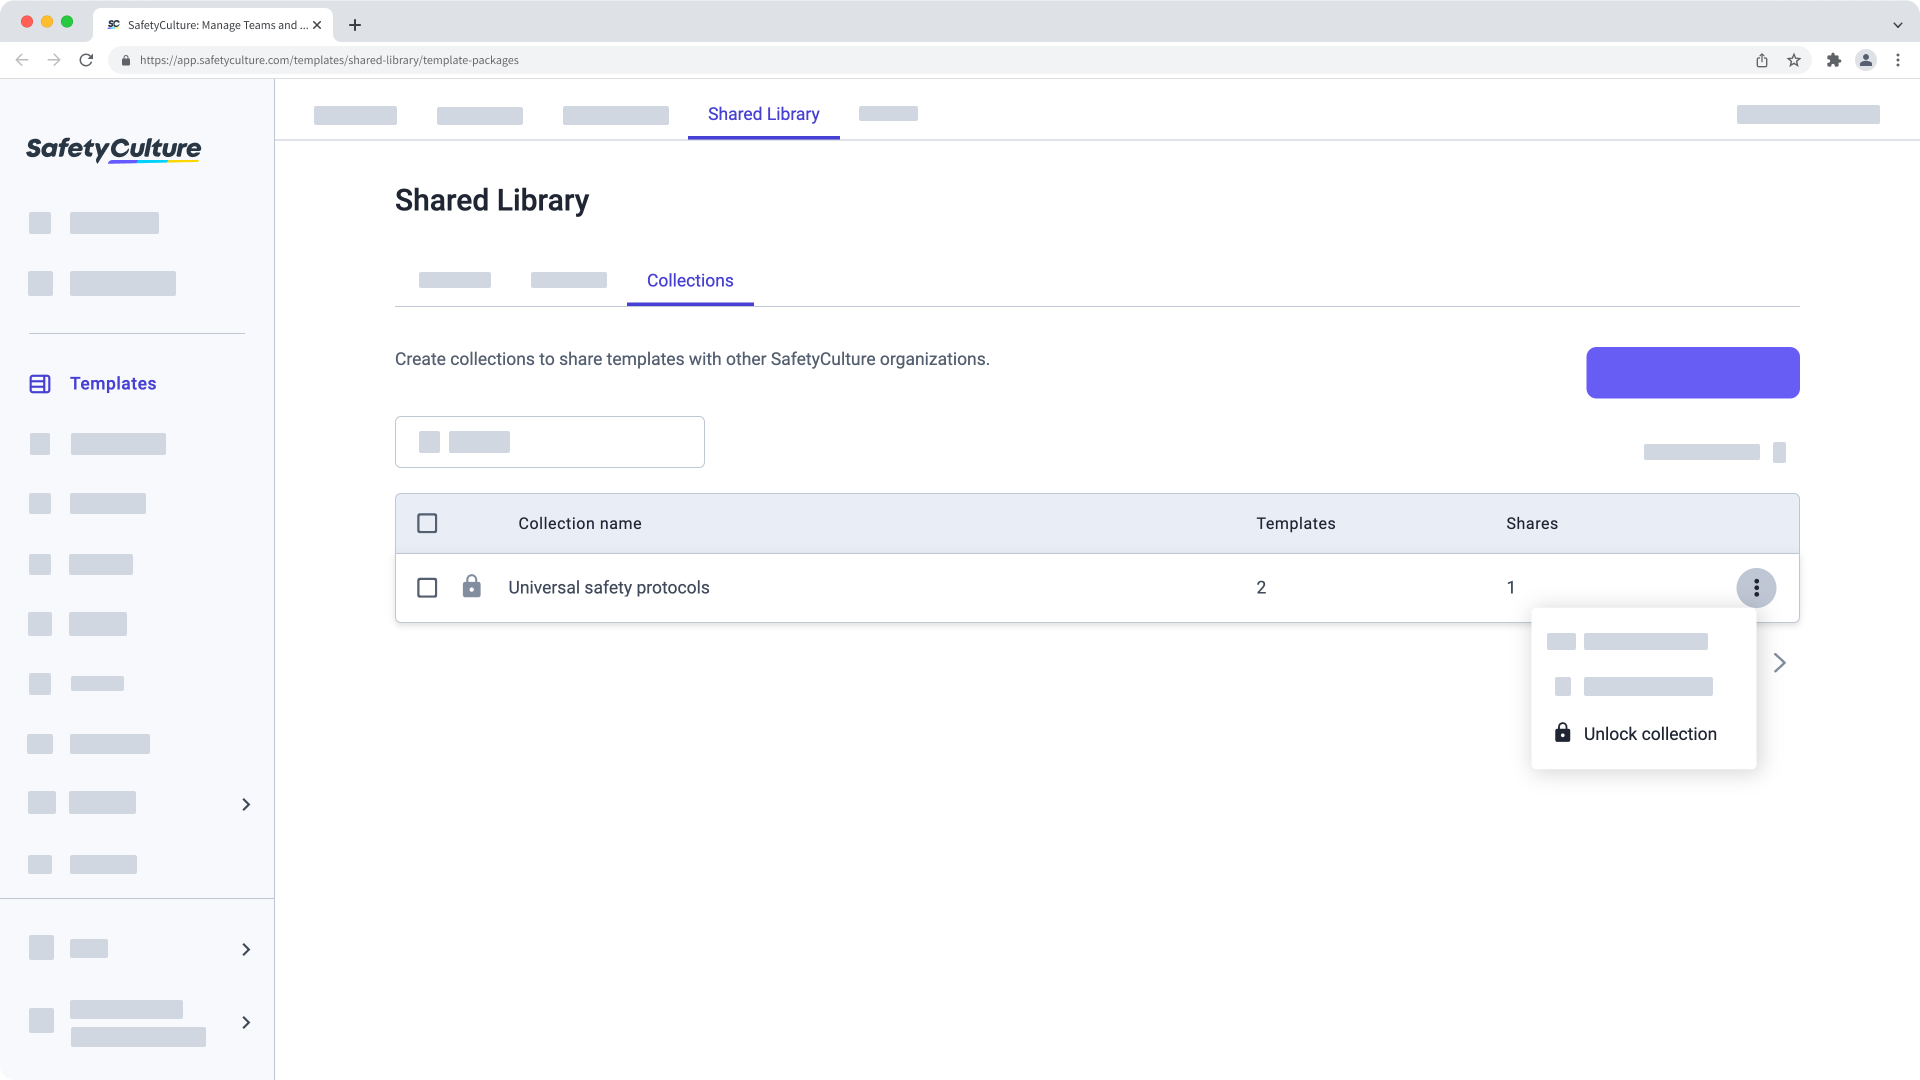 Unlock a Shared Library template collection via the web app.